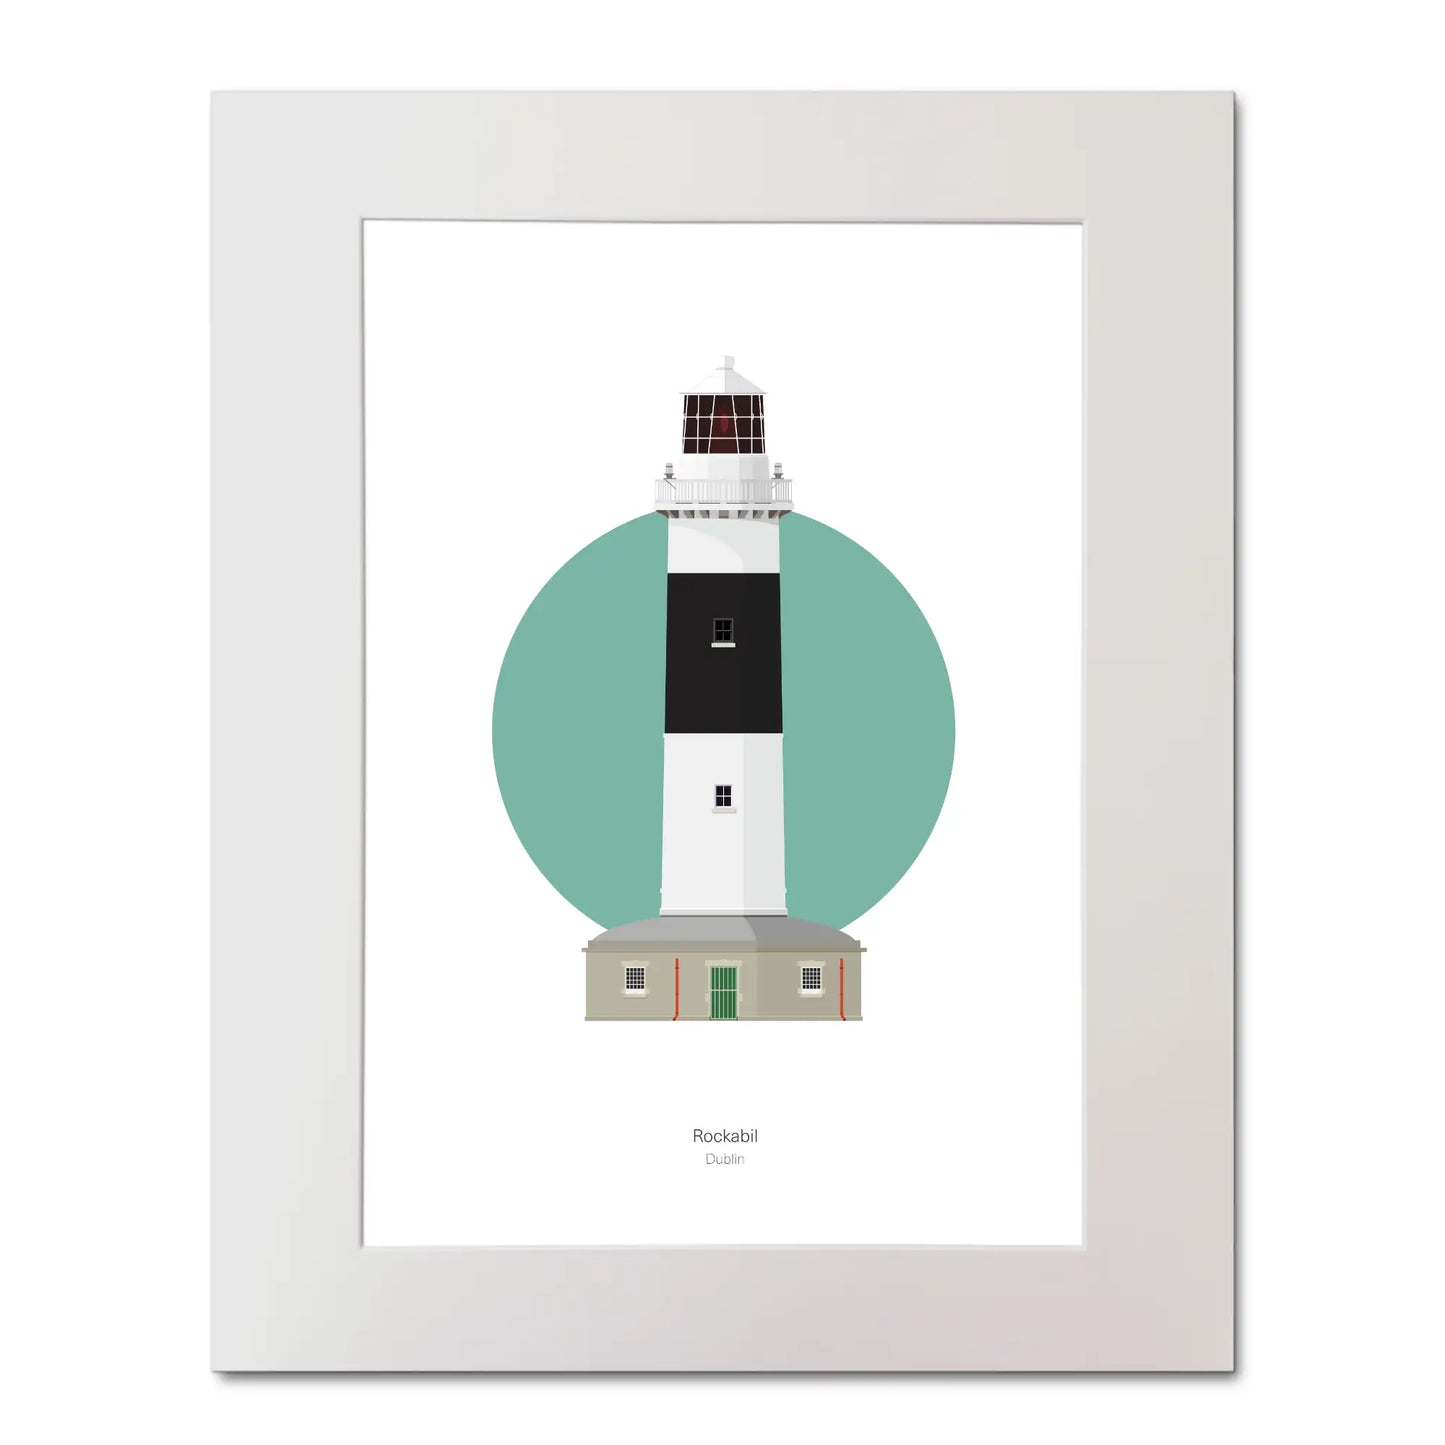 Illustration of Rockabill lighthouse on a white background inside light blue square, mounted and measuring 40x50cm.